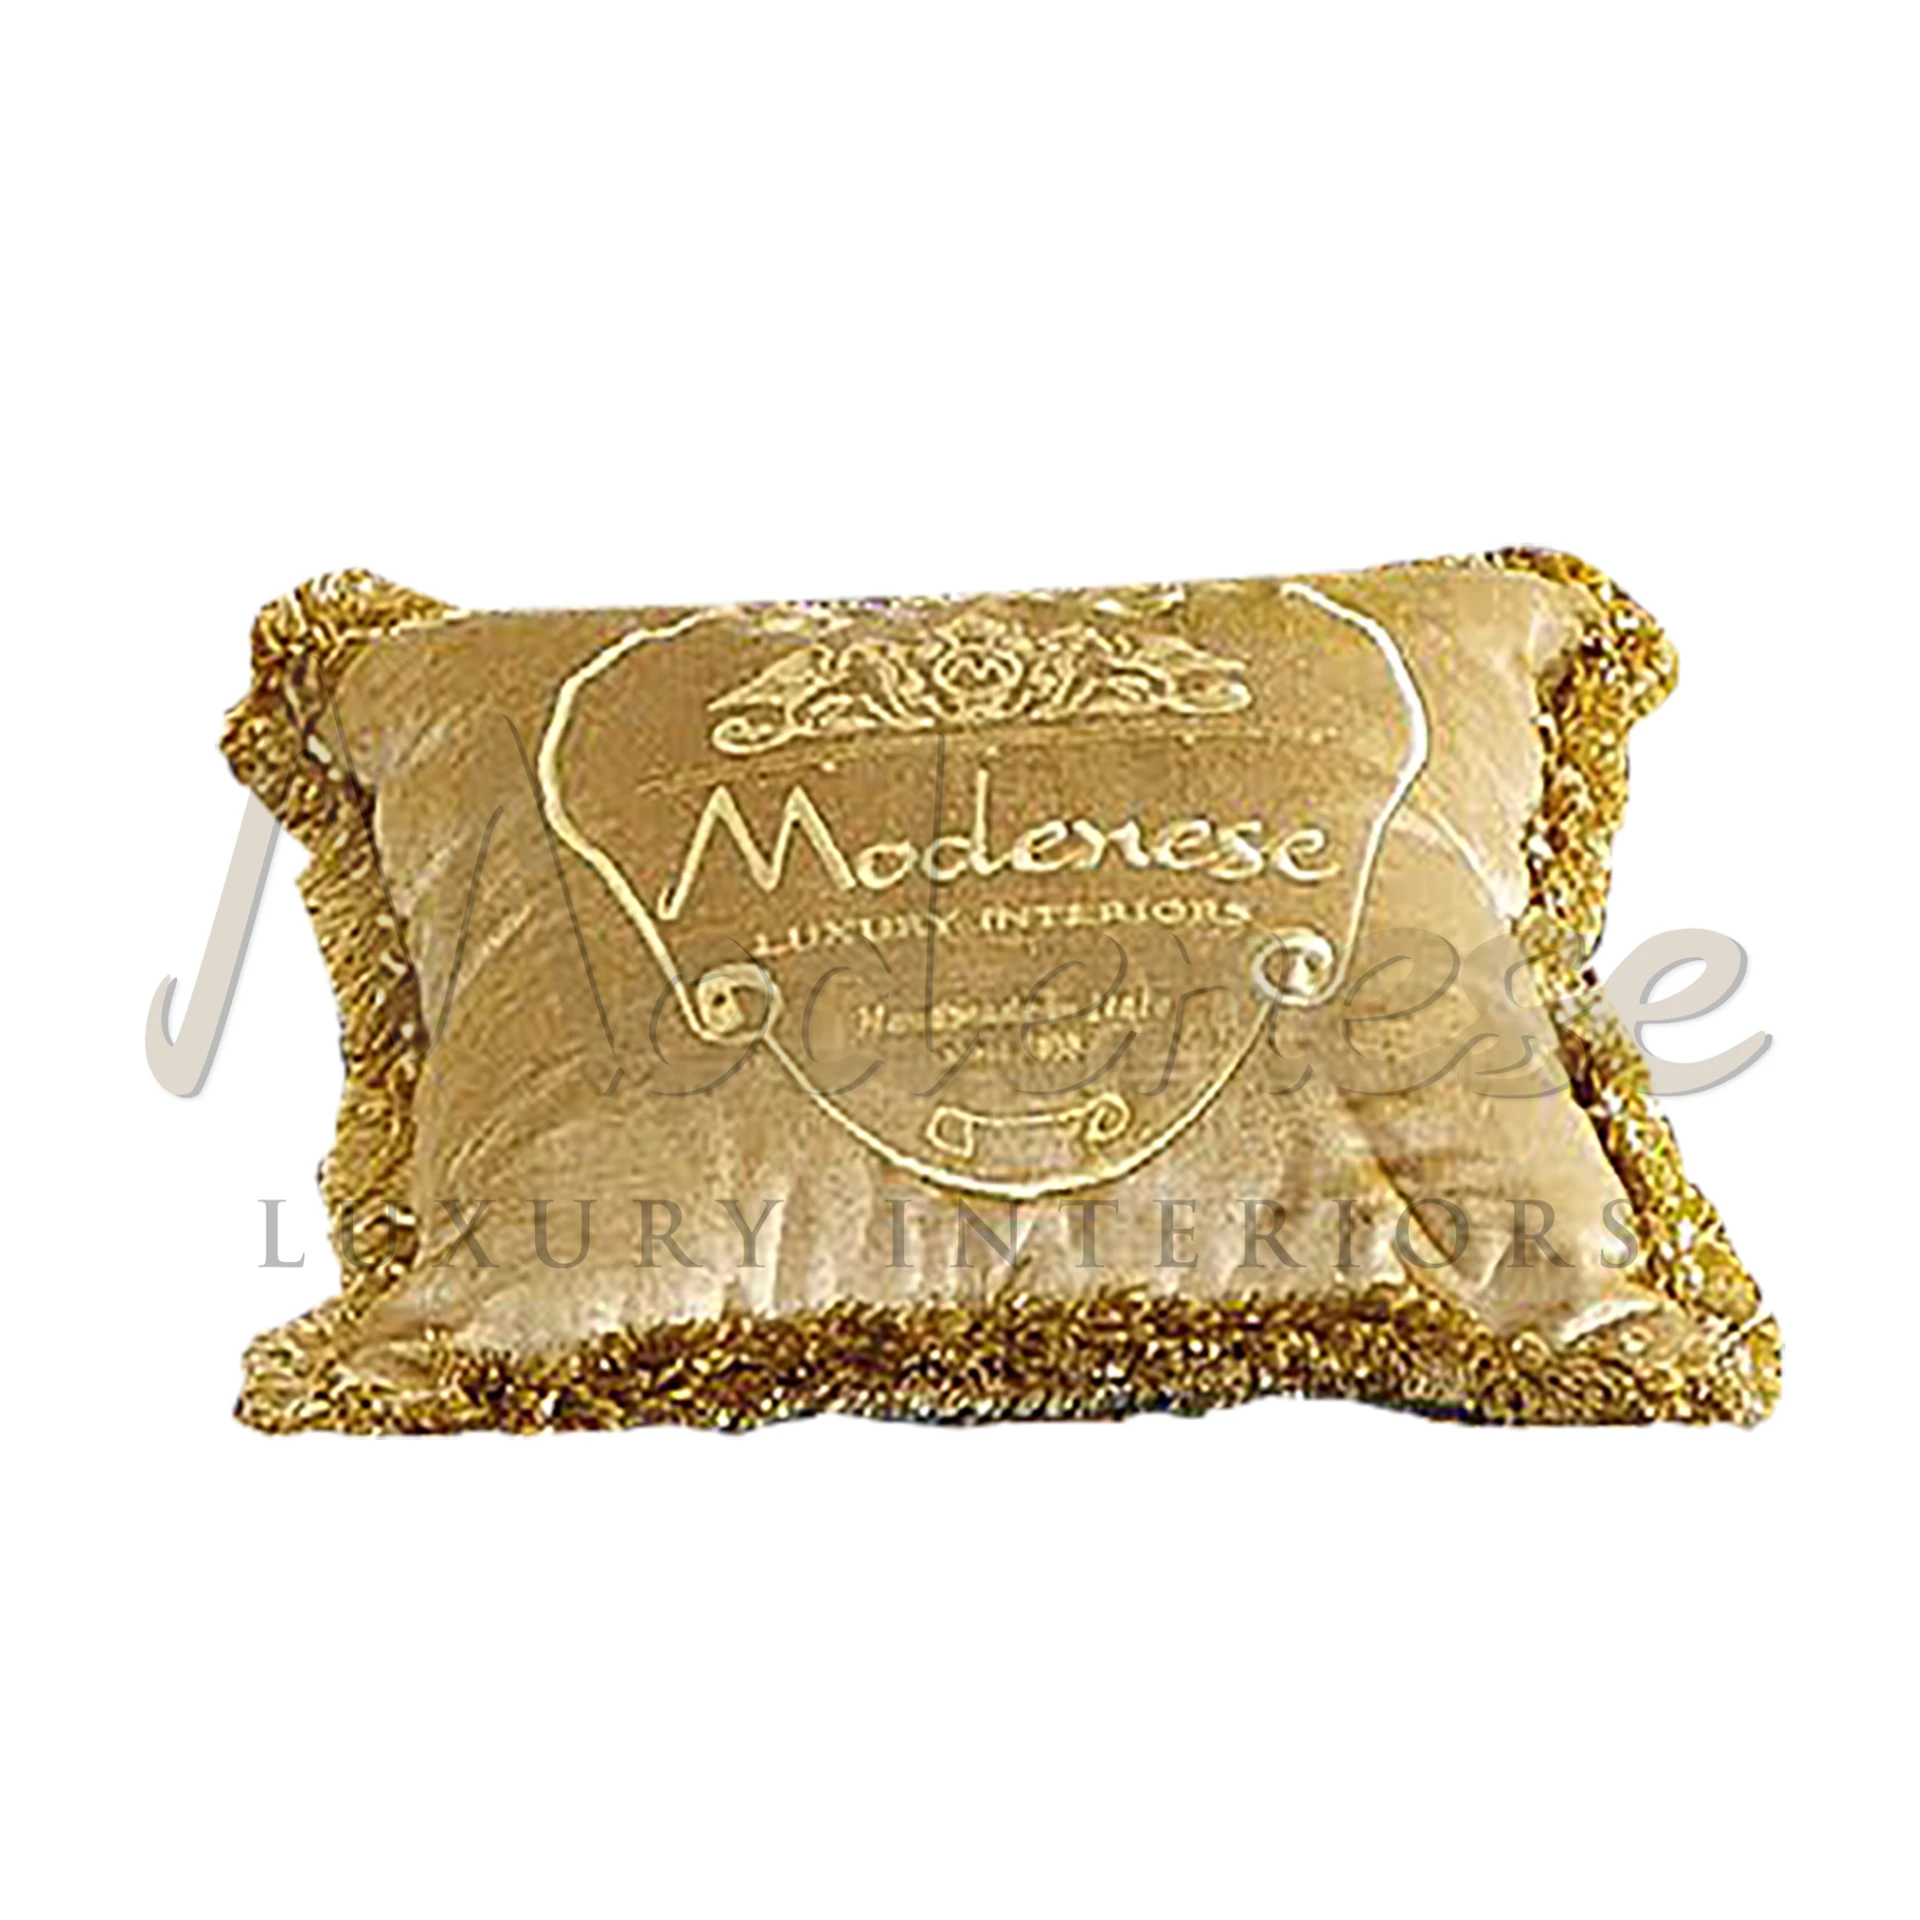 Designer Beige Pillow with unique patterns and artistic embellishments, showcasing Italian luxury textile innovation.